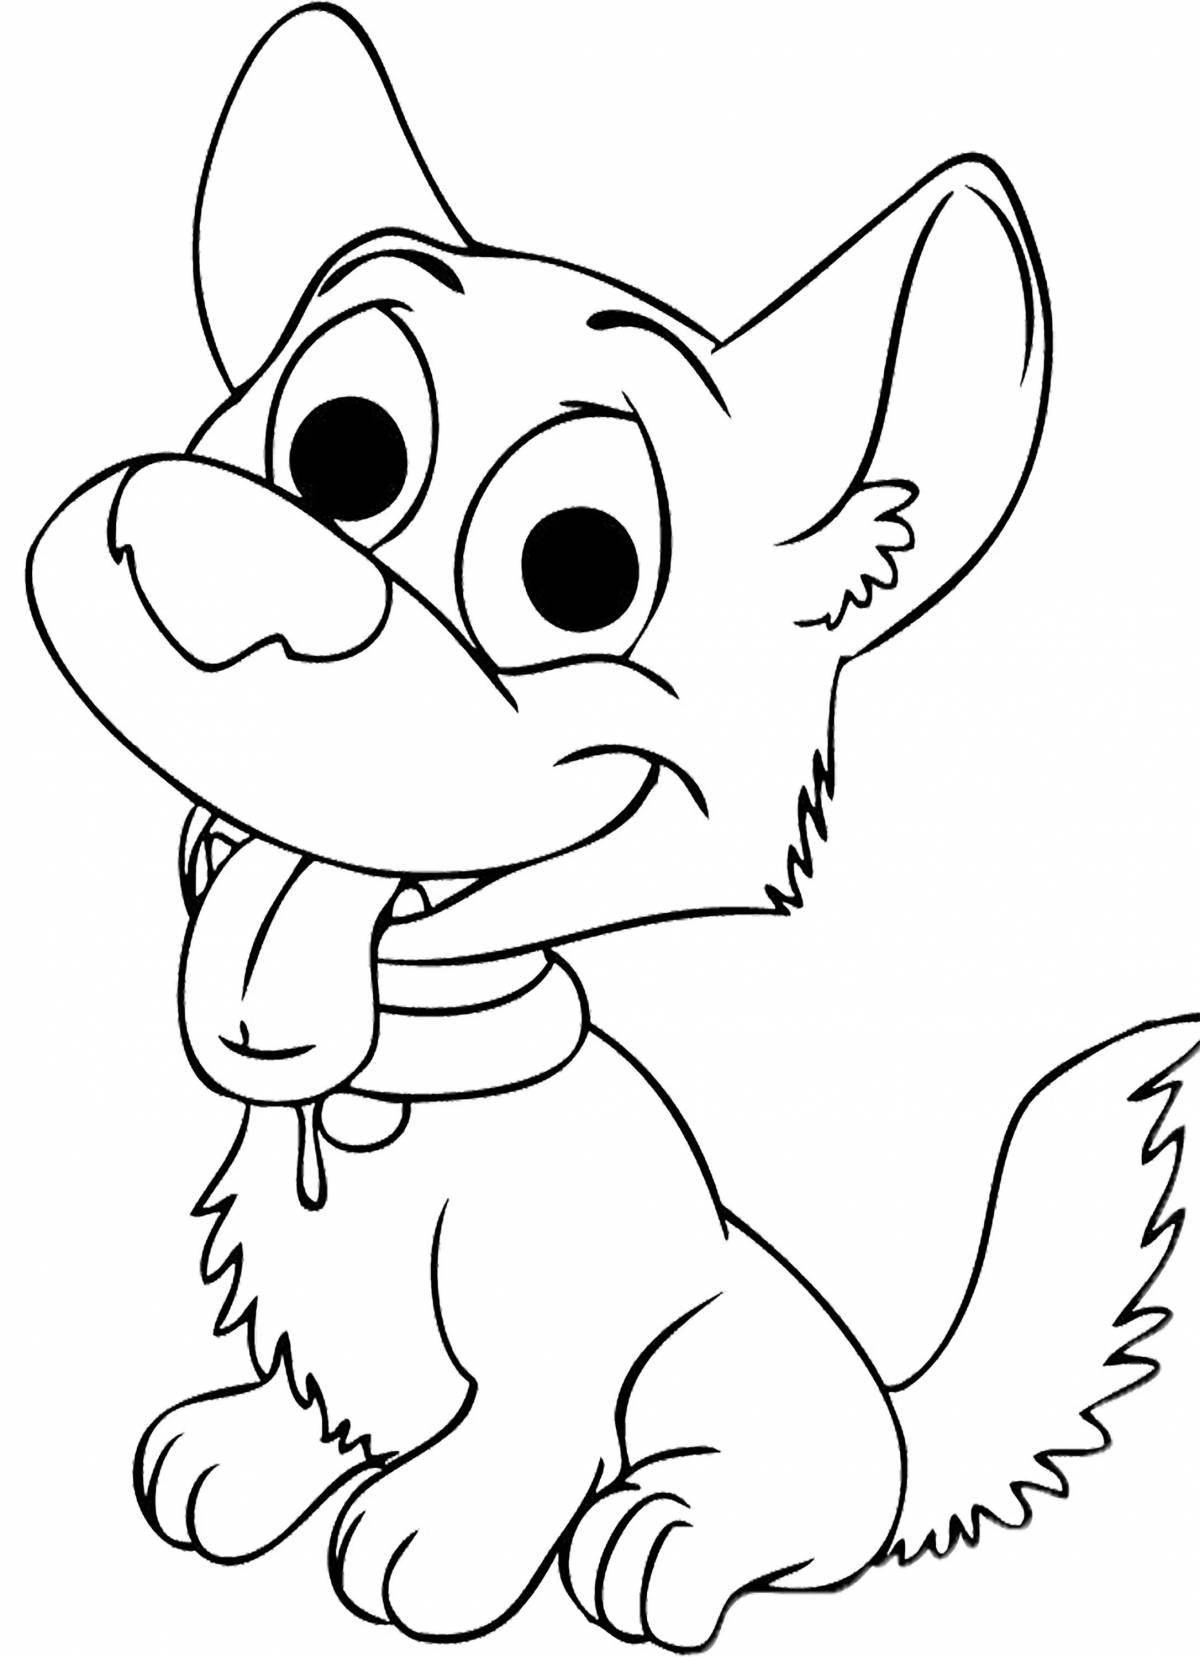 Naughty cats and dogs coloring page